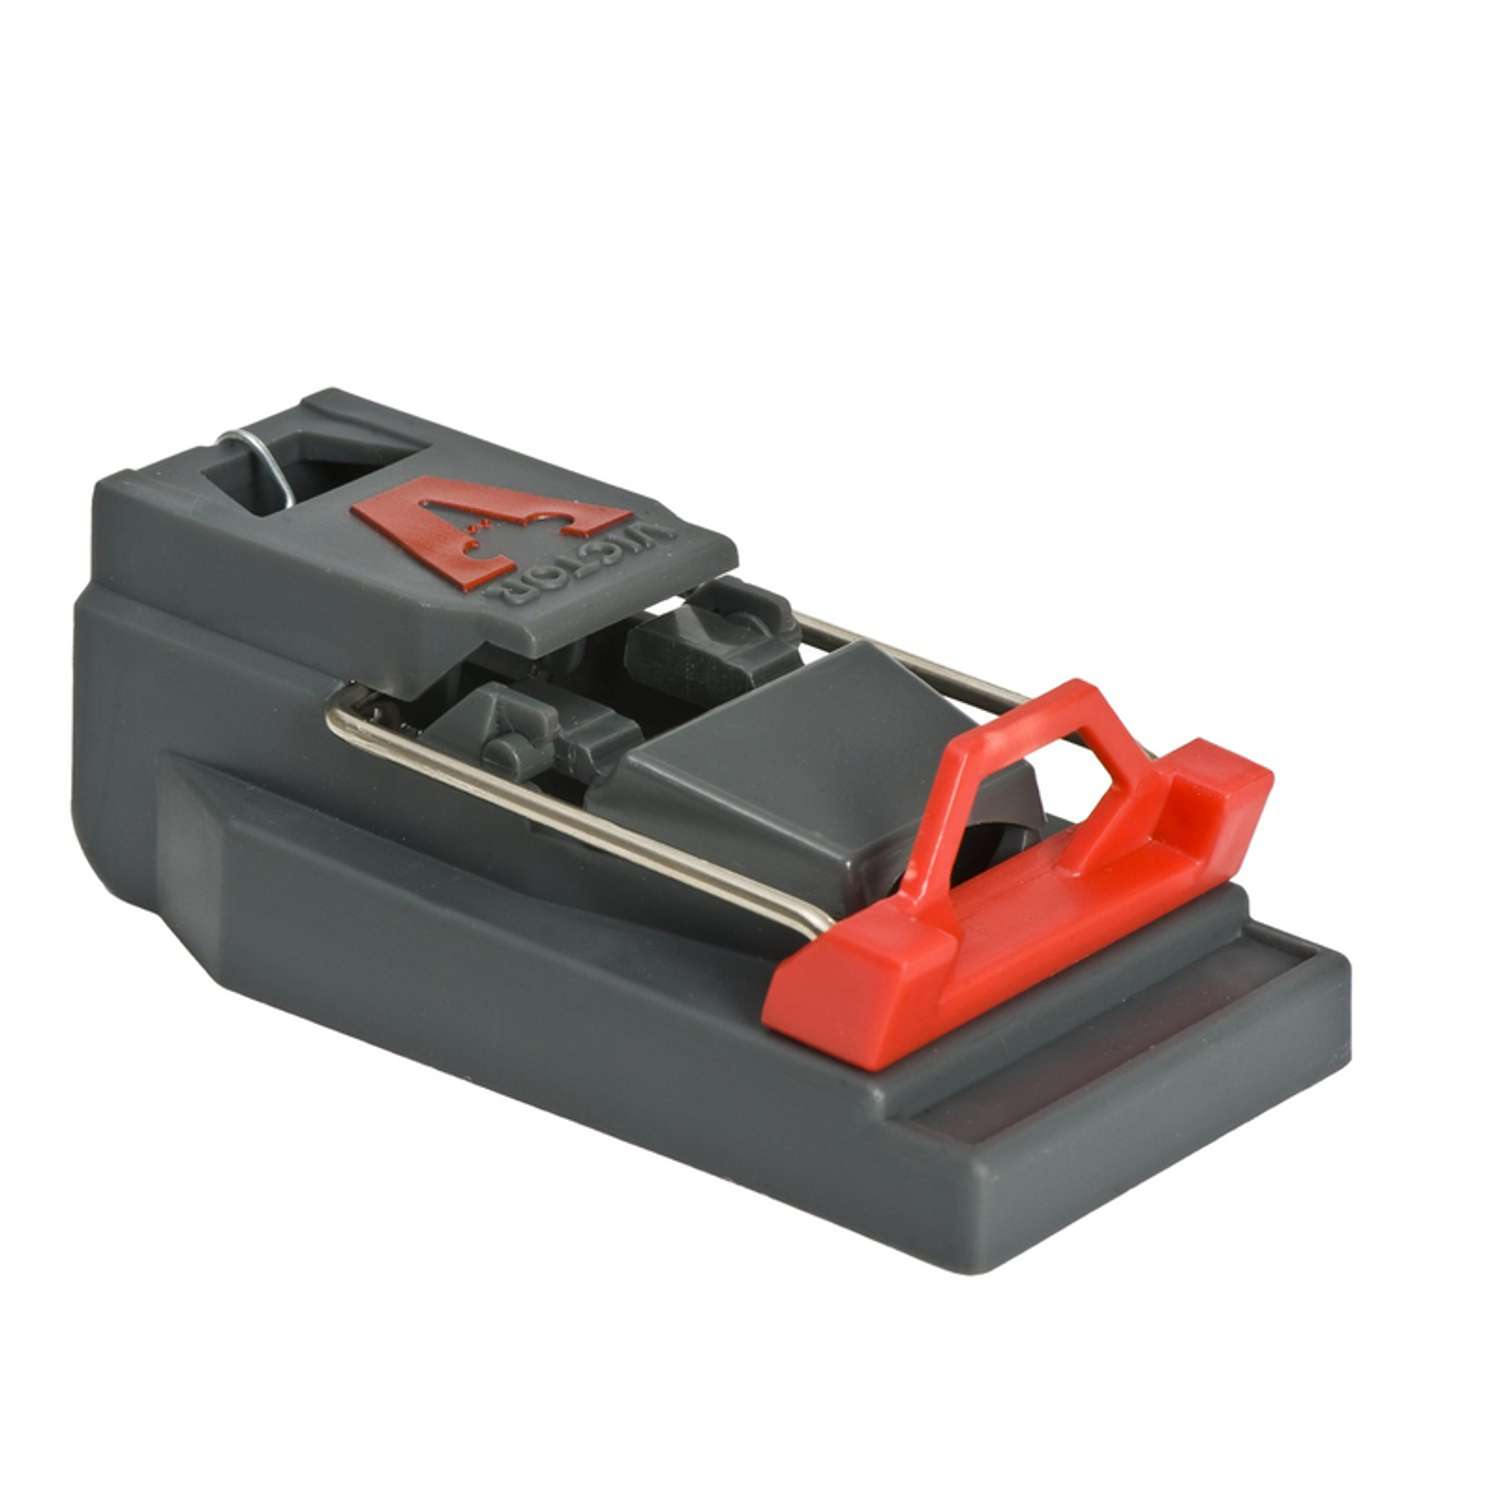 Order now Victor Power Mouse Trap, 3 pk.